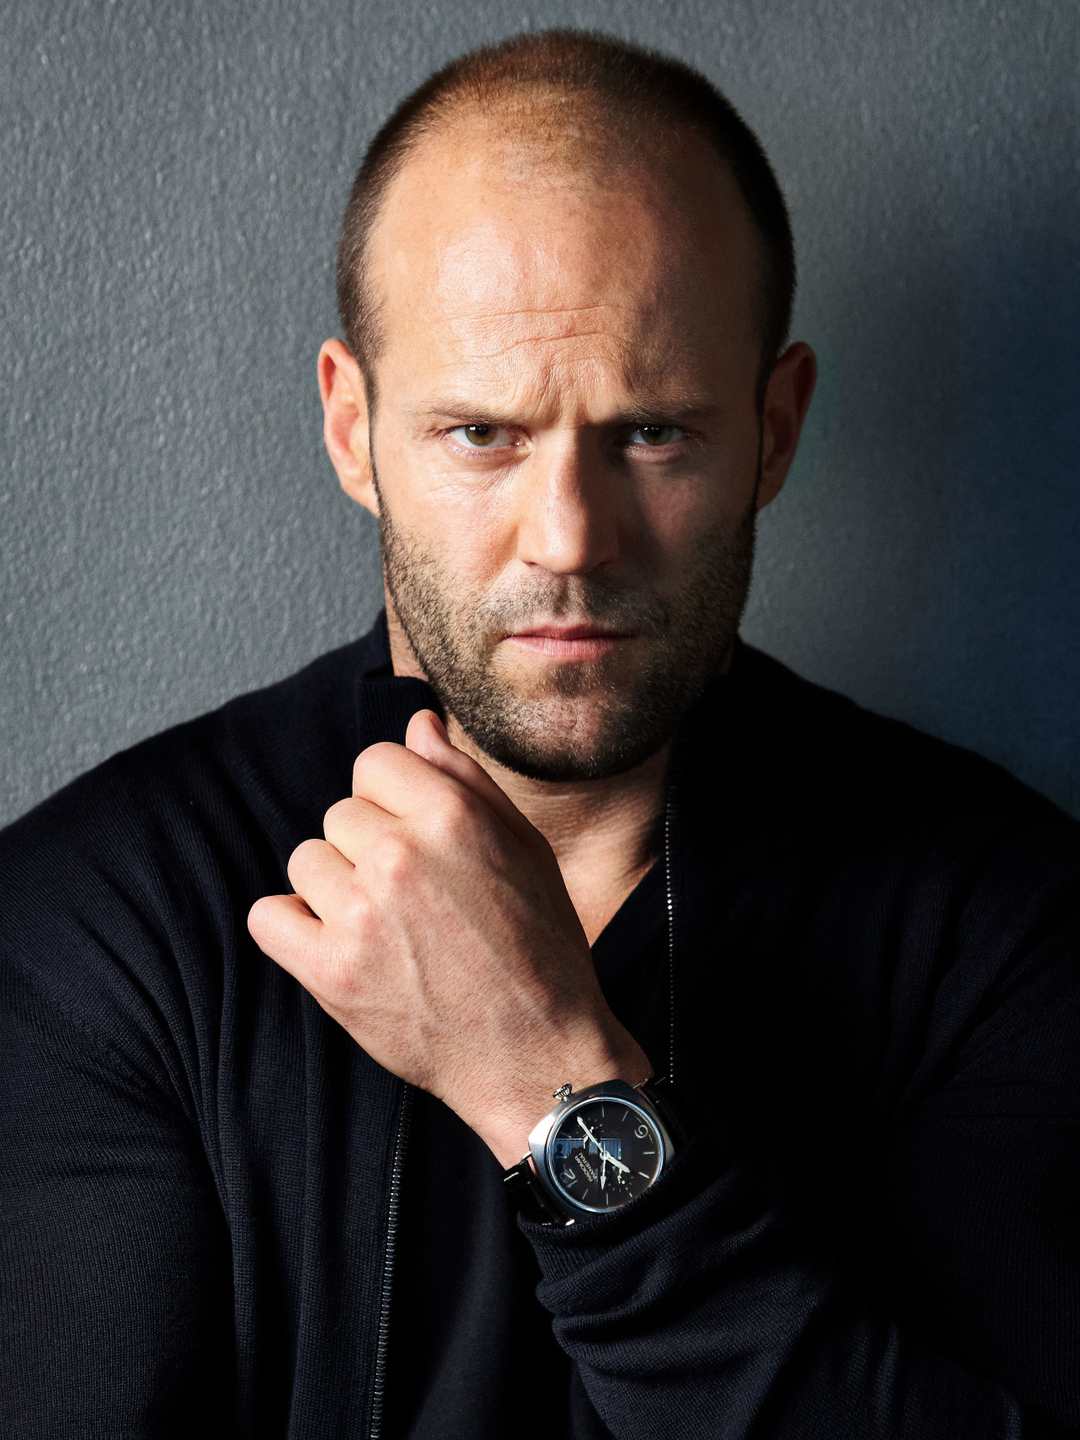 Jason Statham does he have a wife